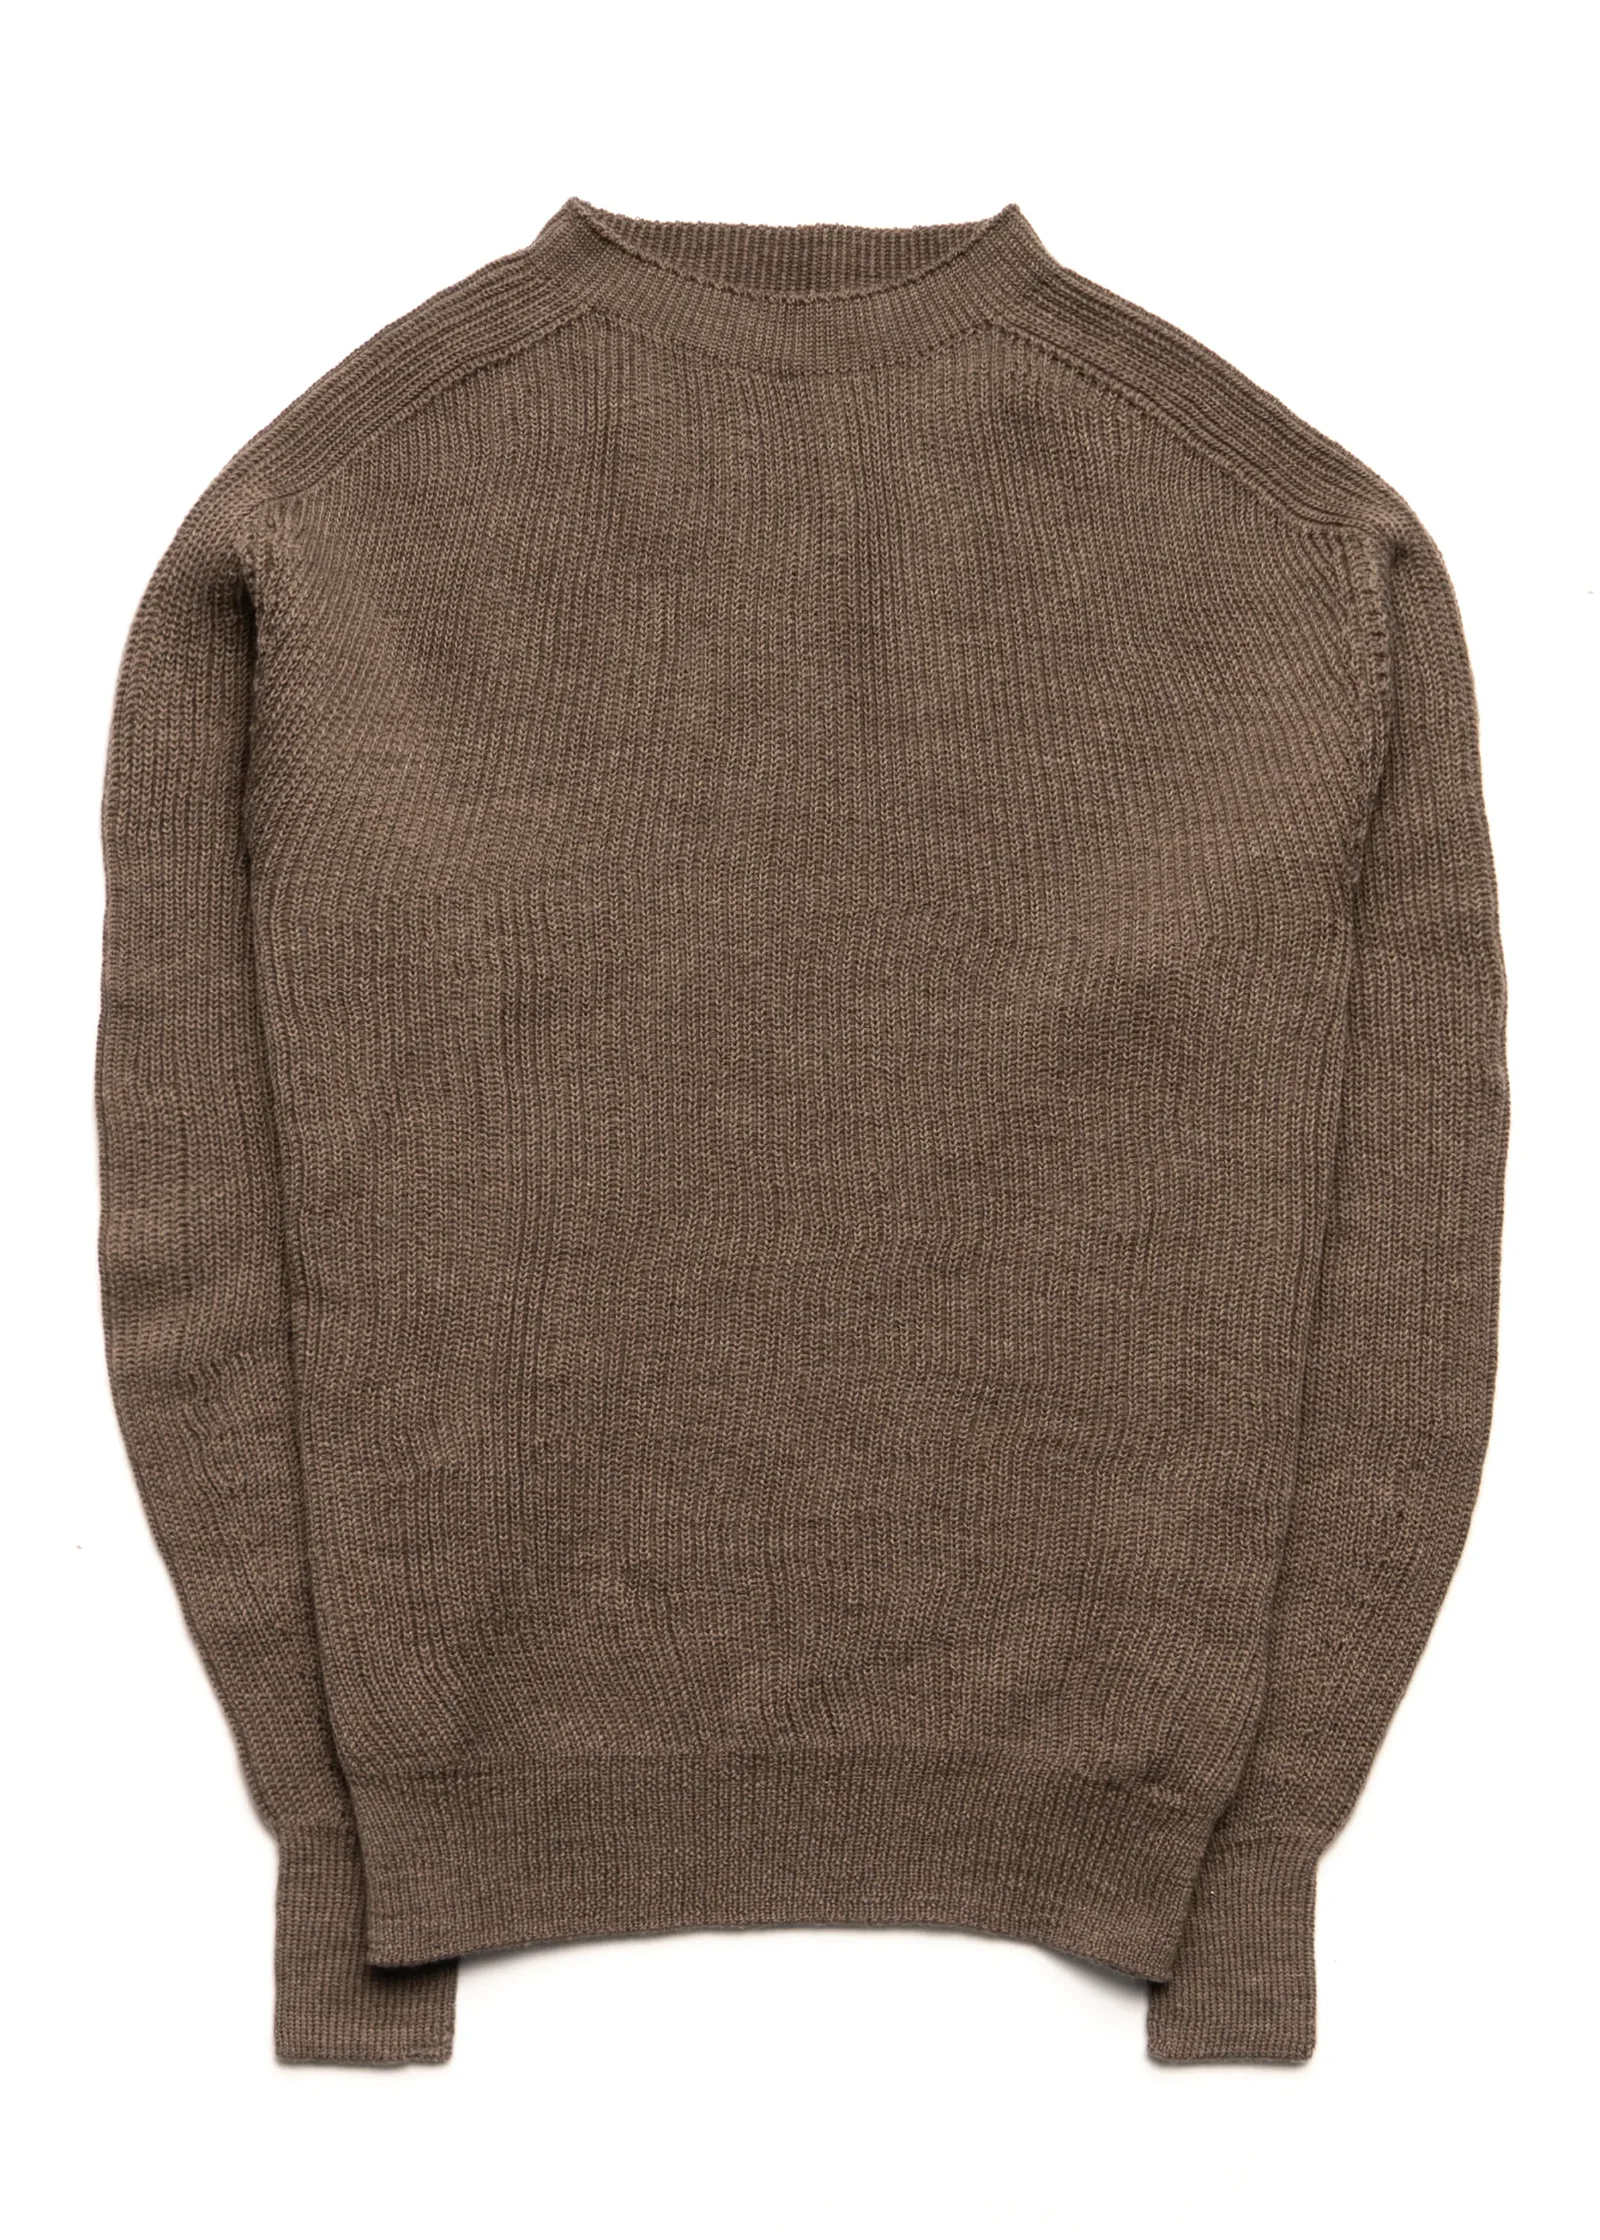 Image of Boat Neck Sweater